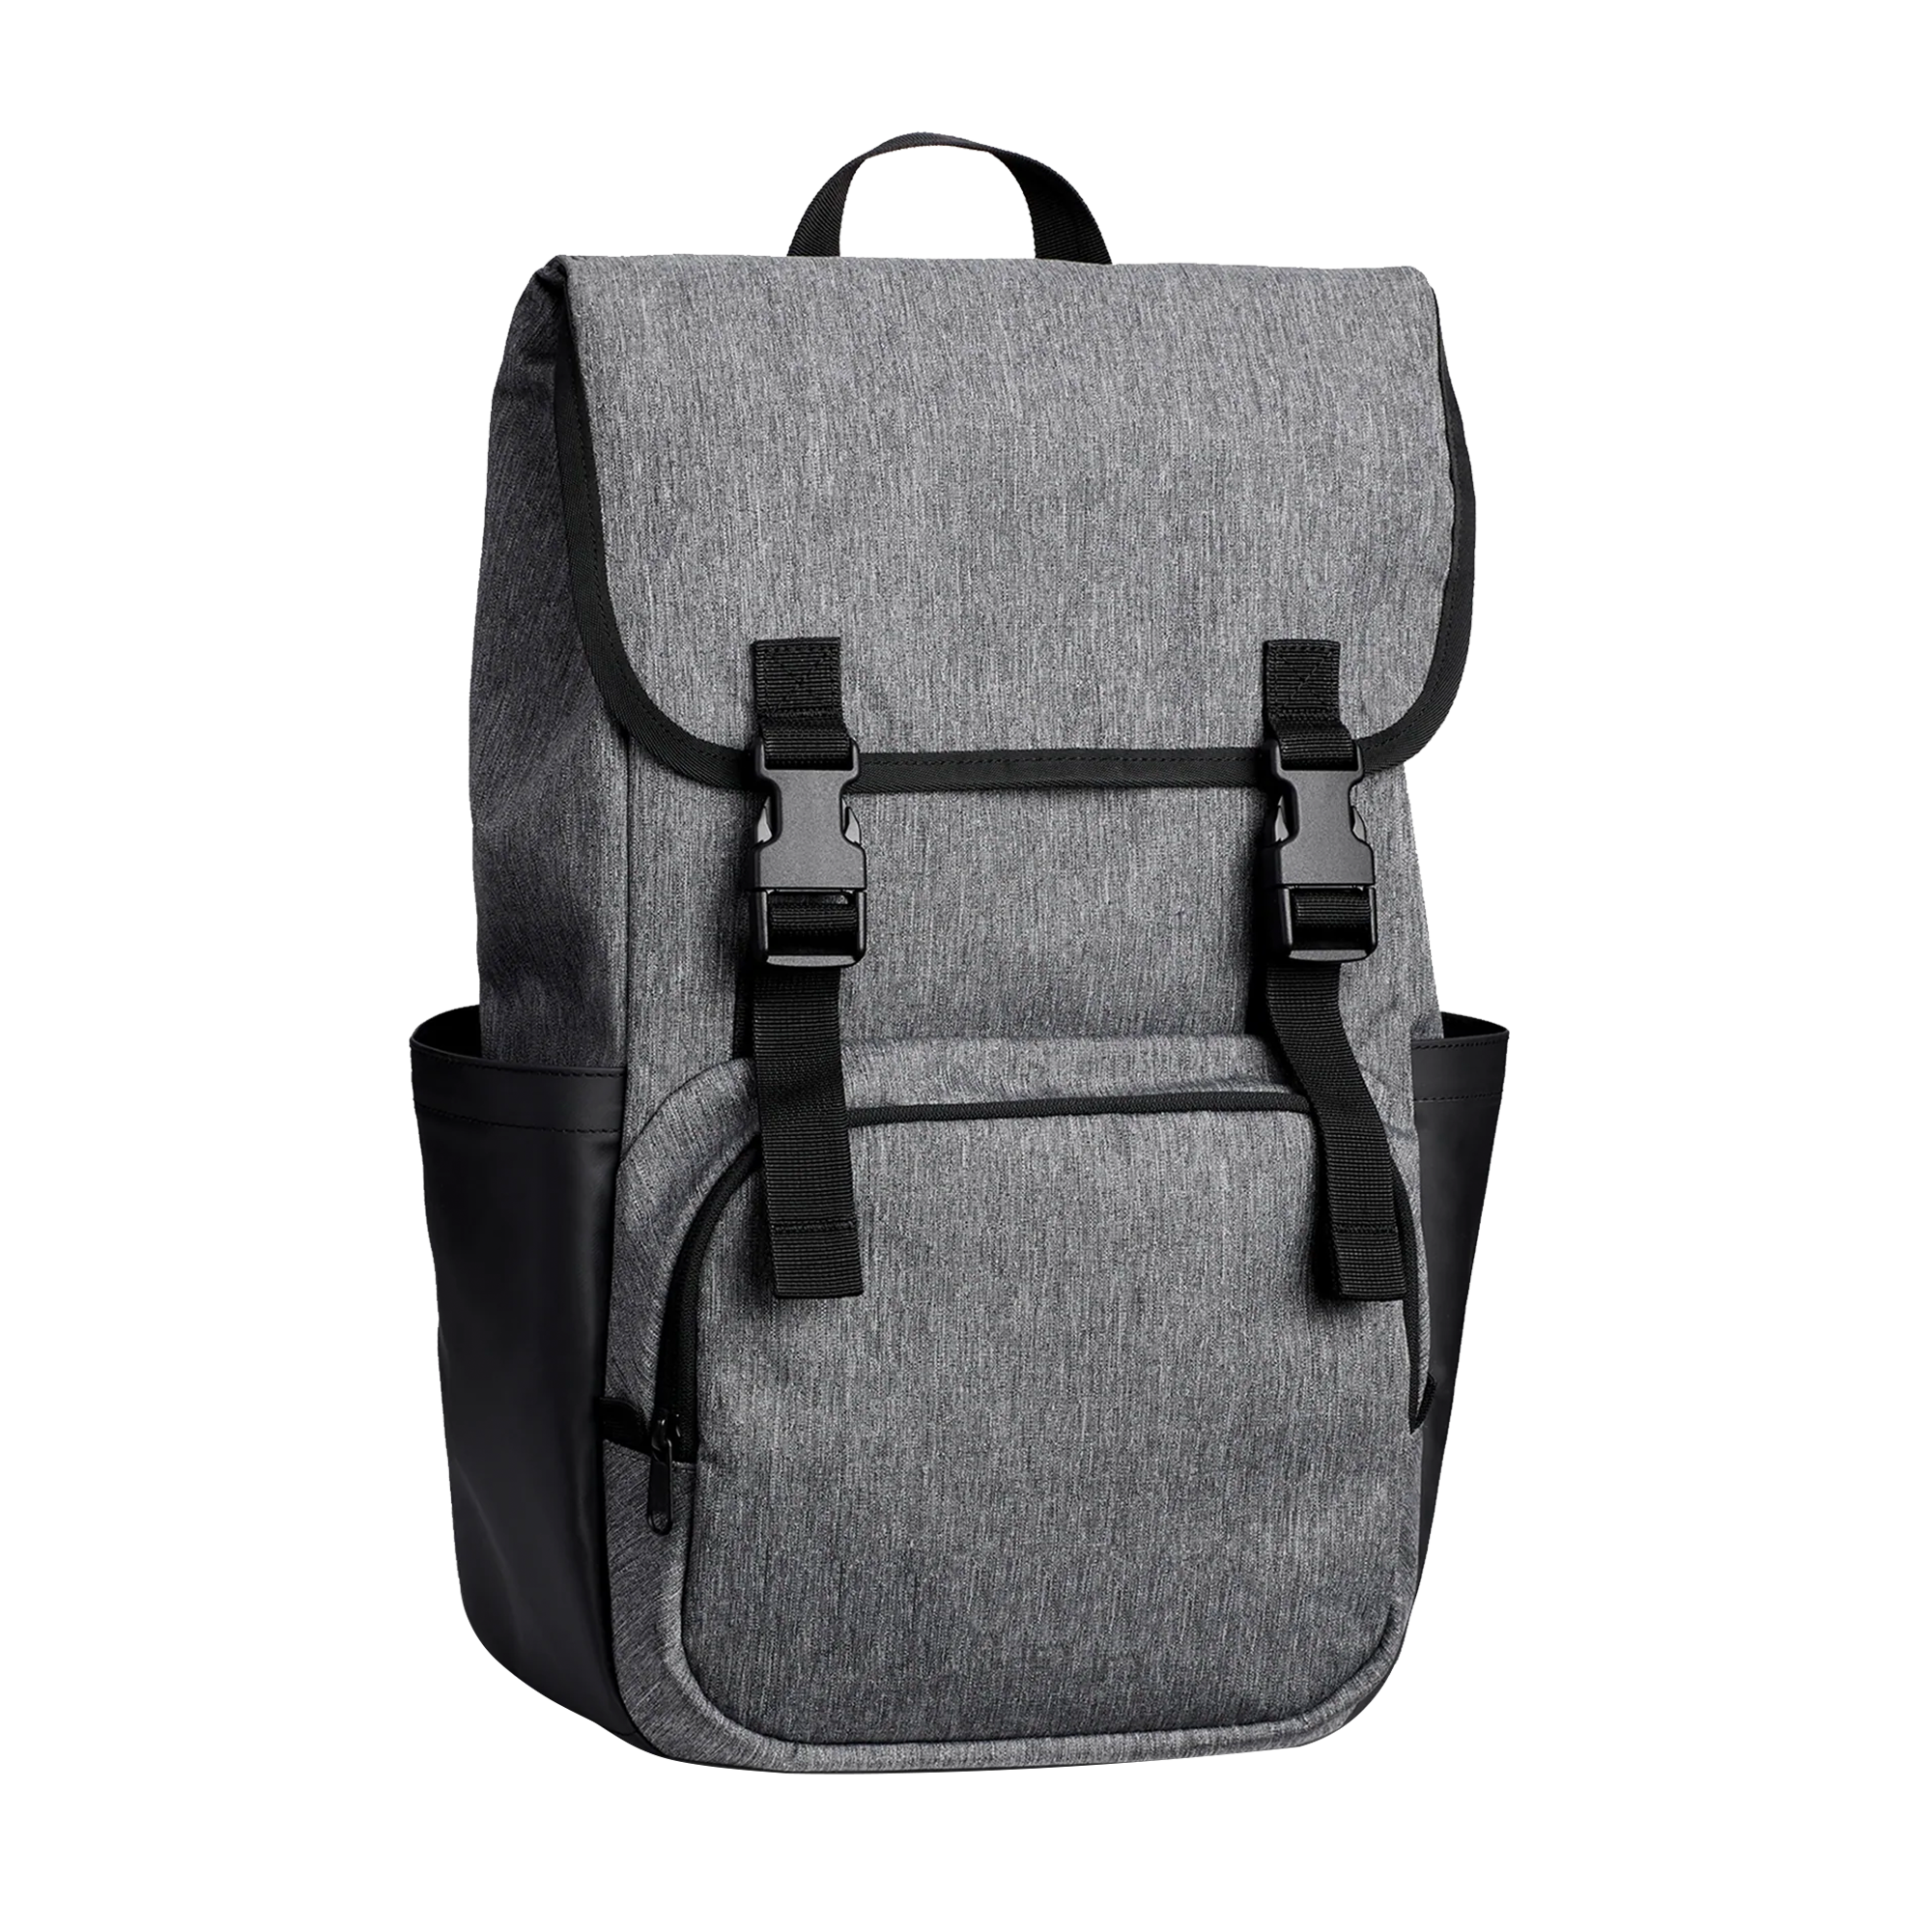 https://img.printfection.com/19/26143/RFN5lUqVoMZX4JE/Timbuk2+1175-3-1282+-+Grey+Heather+%28Front%29.png